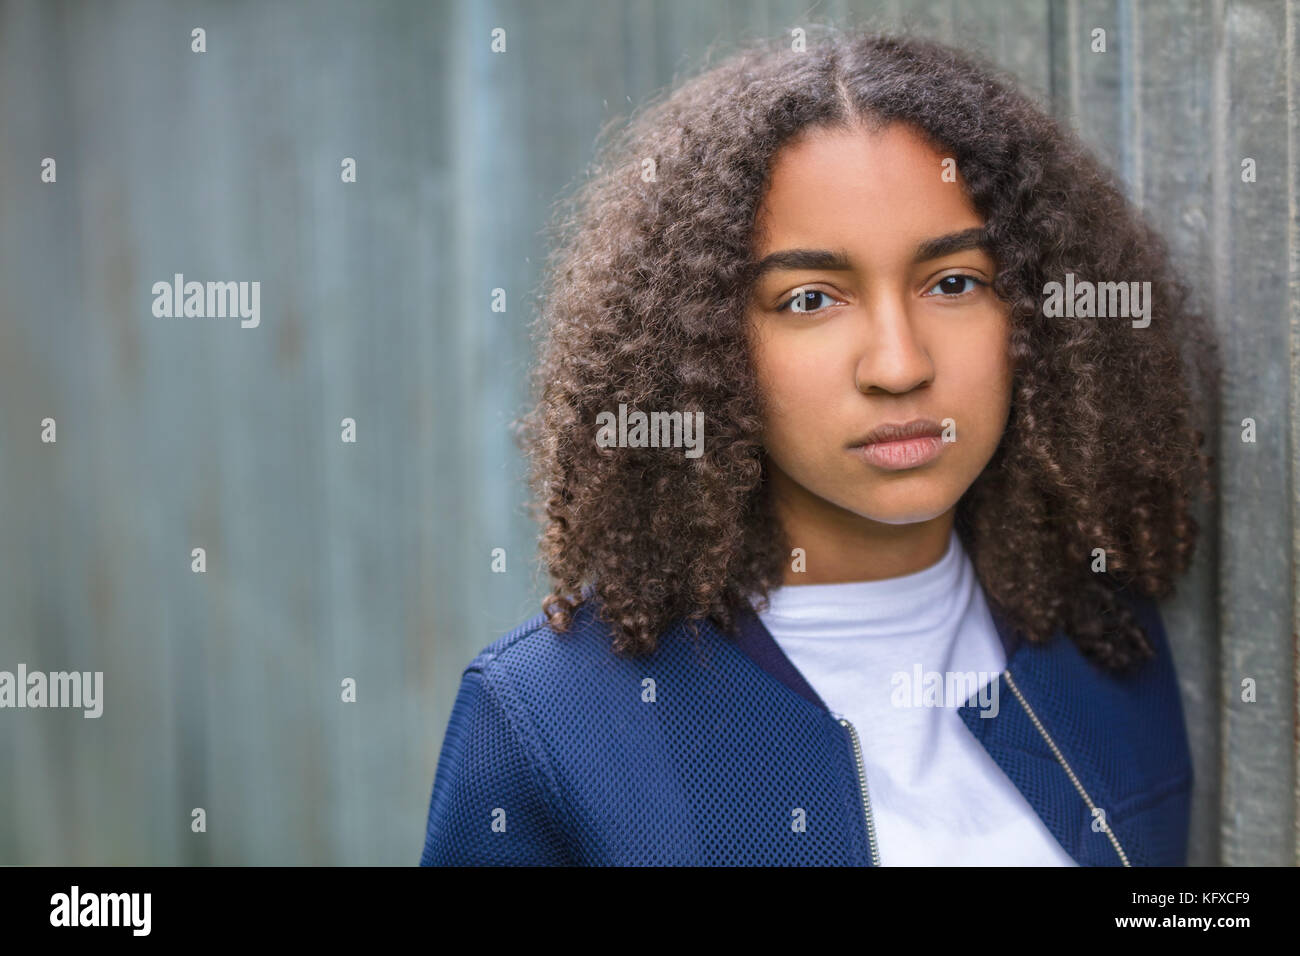 Beautiful mixed race African American girl teenager female young woman outside looking sad depressed or thoughtful Stock Photo